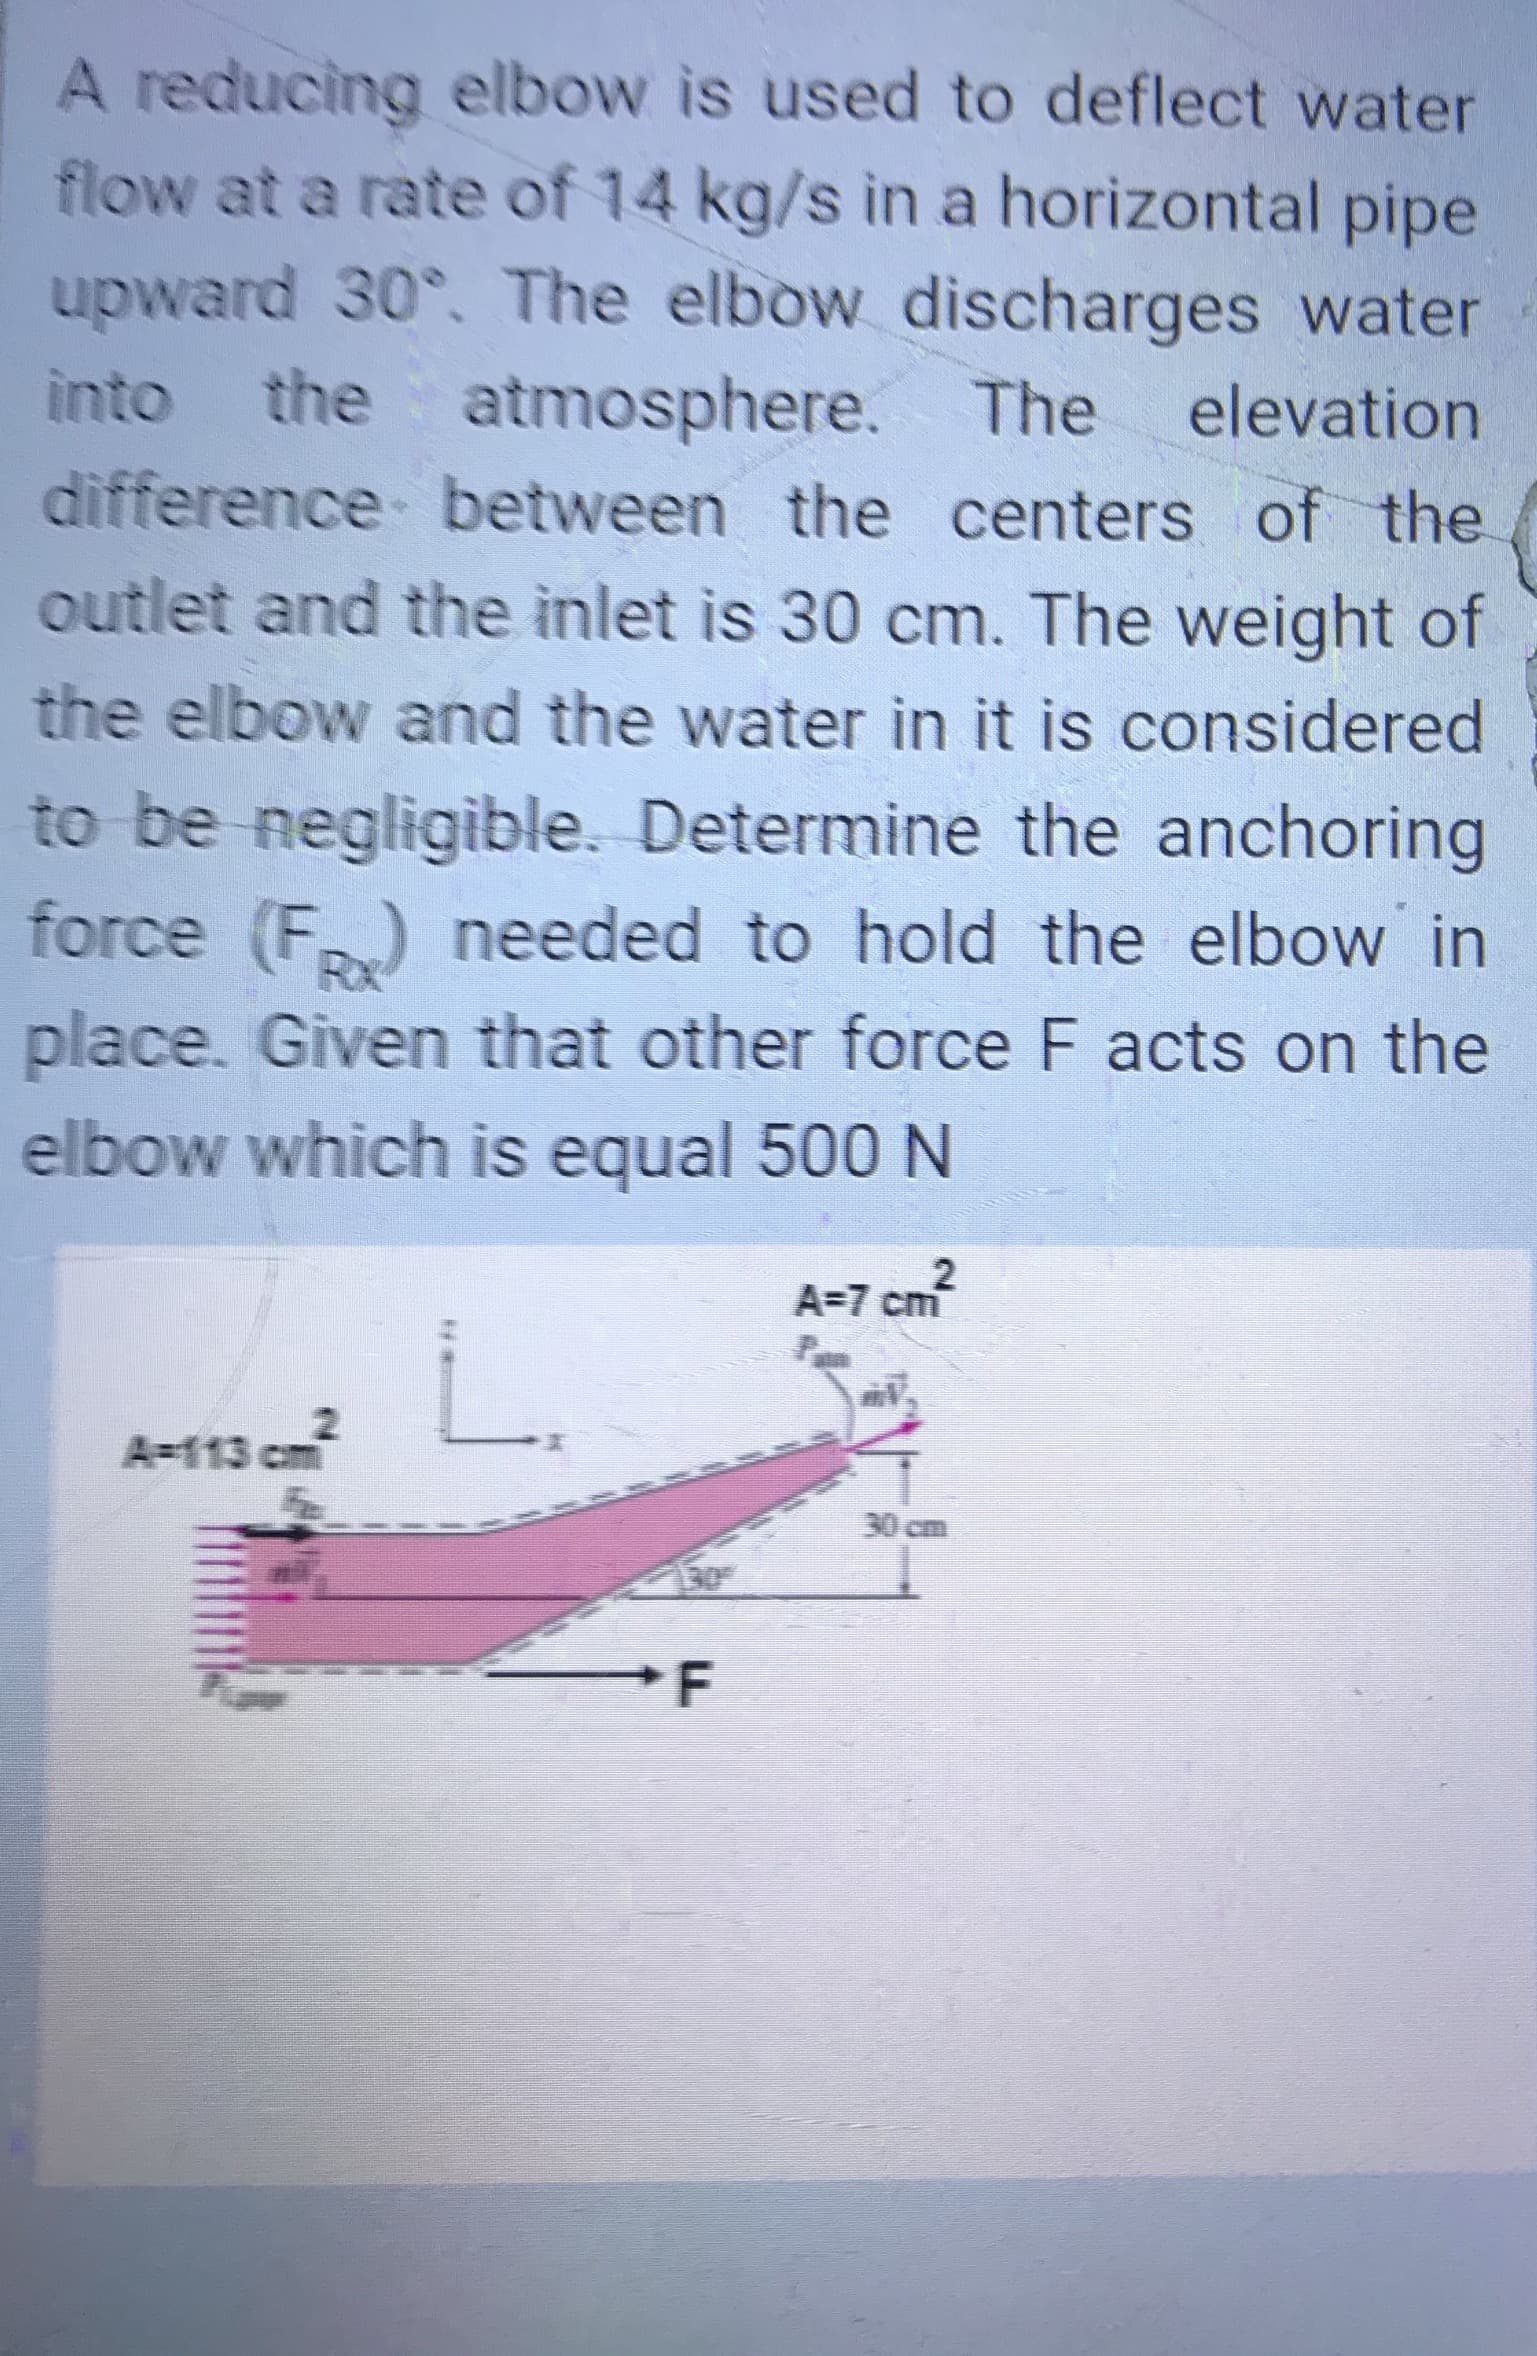 A reducing elbow is used to deflect water
flow at a rate of 14 kg/s in a horizontal pipe
upward 30°. The elbow discharges water
into the
atmosphere. The
difference between the centers of the
outlet and the inlet is 30 cm. The weight of
elevation
the elbow and the water in it is considered
to be negligible. Determine the anchoring
force (F) needed to hold the elbow in
Rx
place. Given that other force F acts on the
elbow which is equal 500 N
A=7 cm
2.
A-113 cm
30 cm
